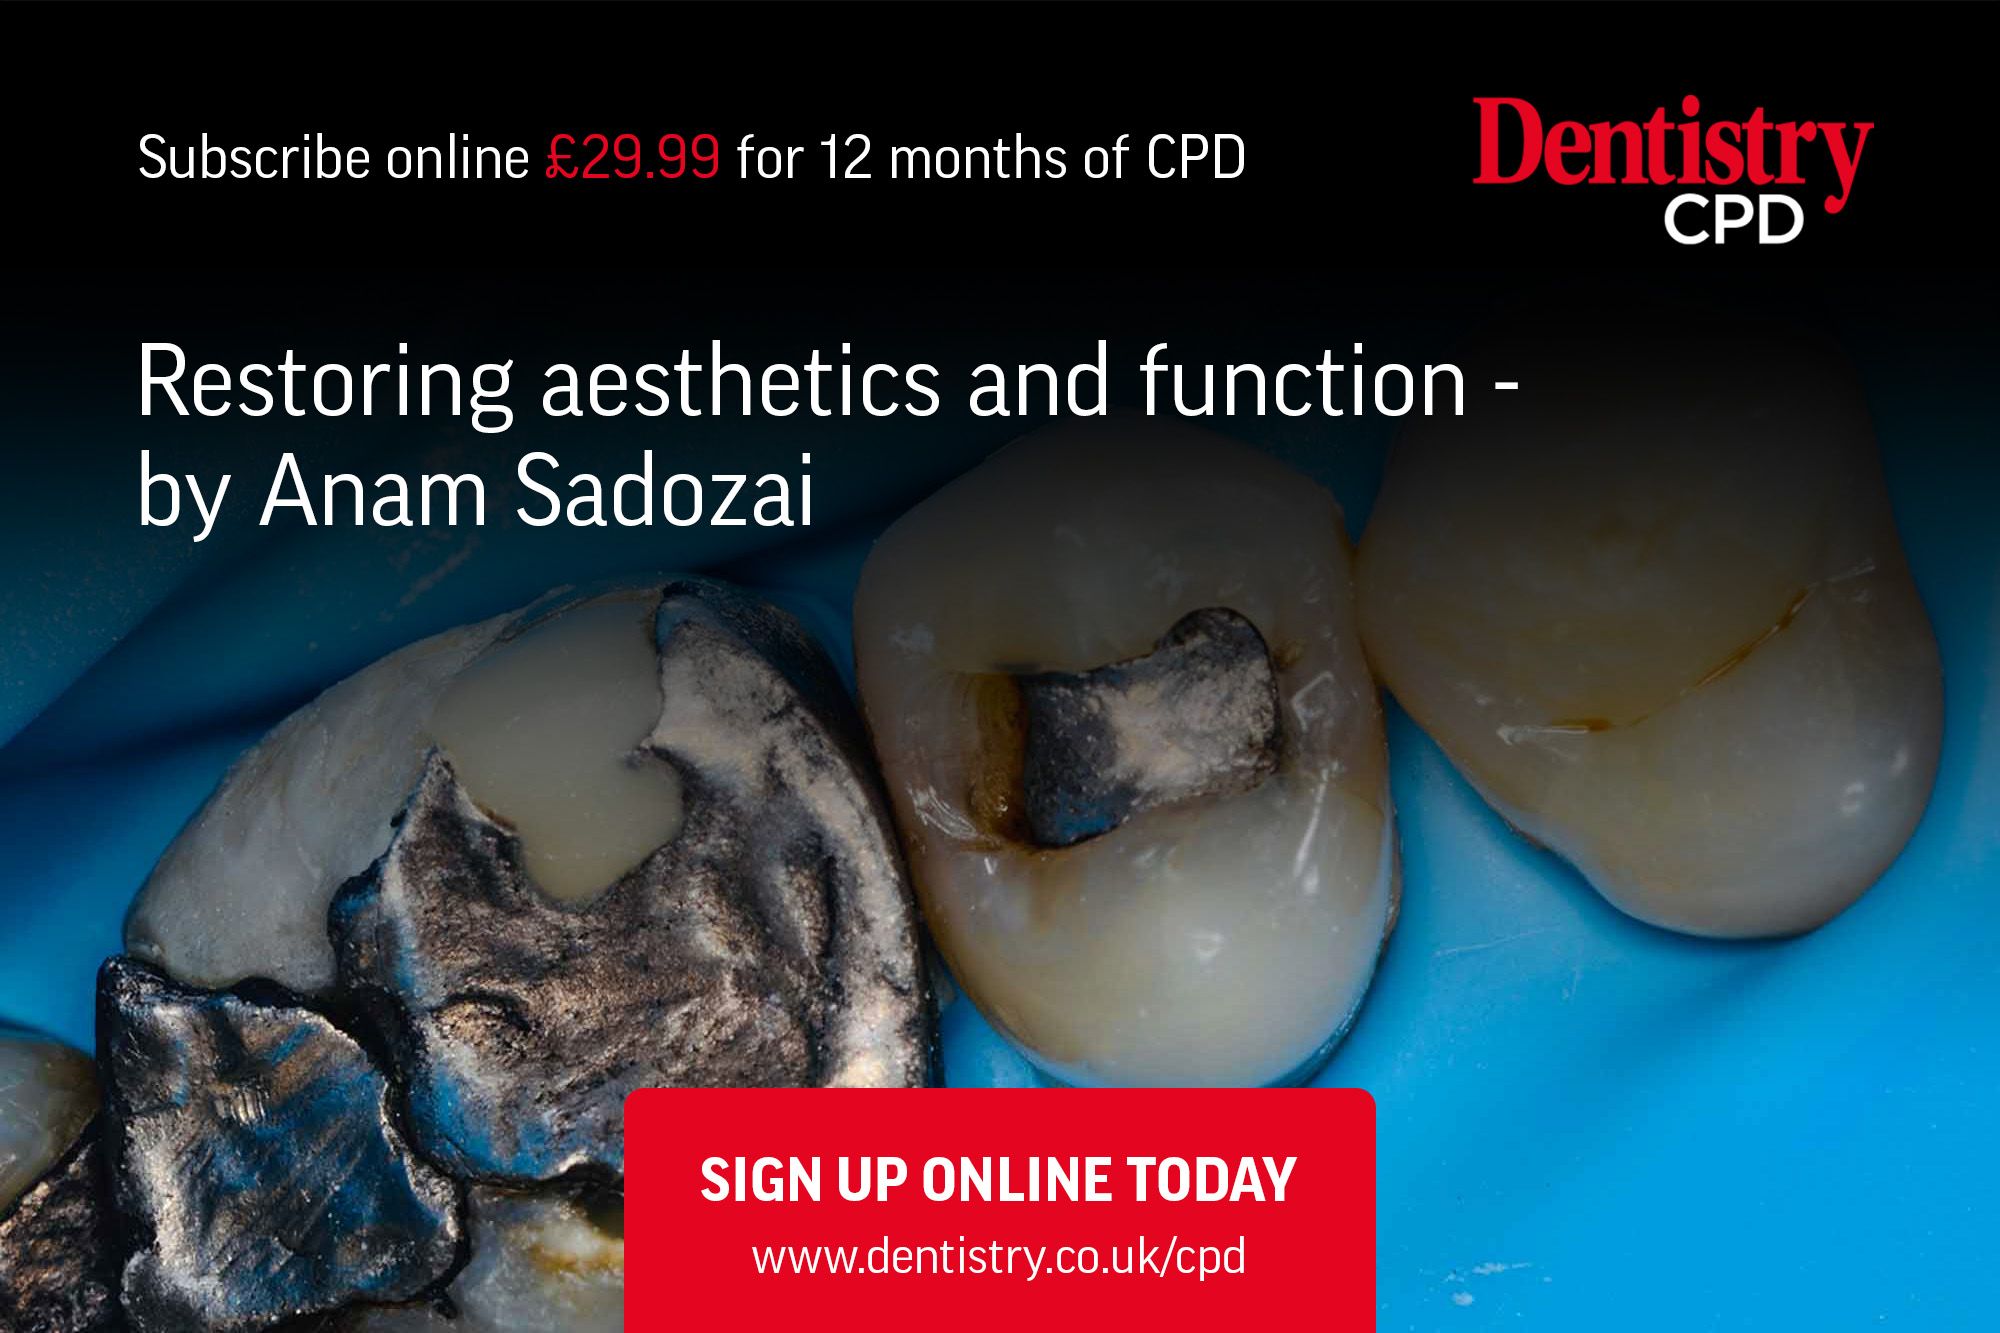 On the topic of aesthetics and function, Anam Sadozai discusses large direct restorations utilising principles of biomimetic dentistry.